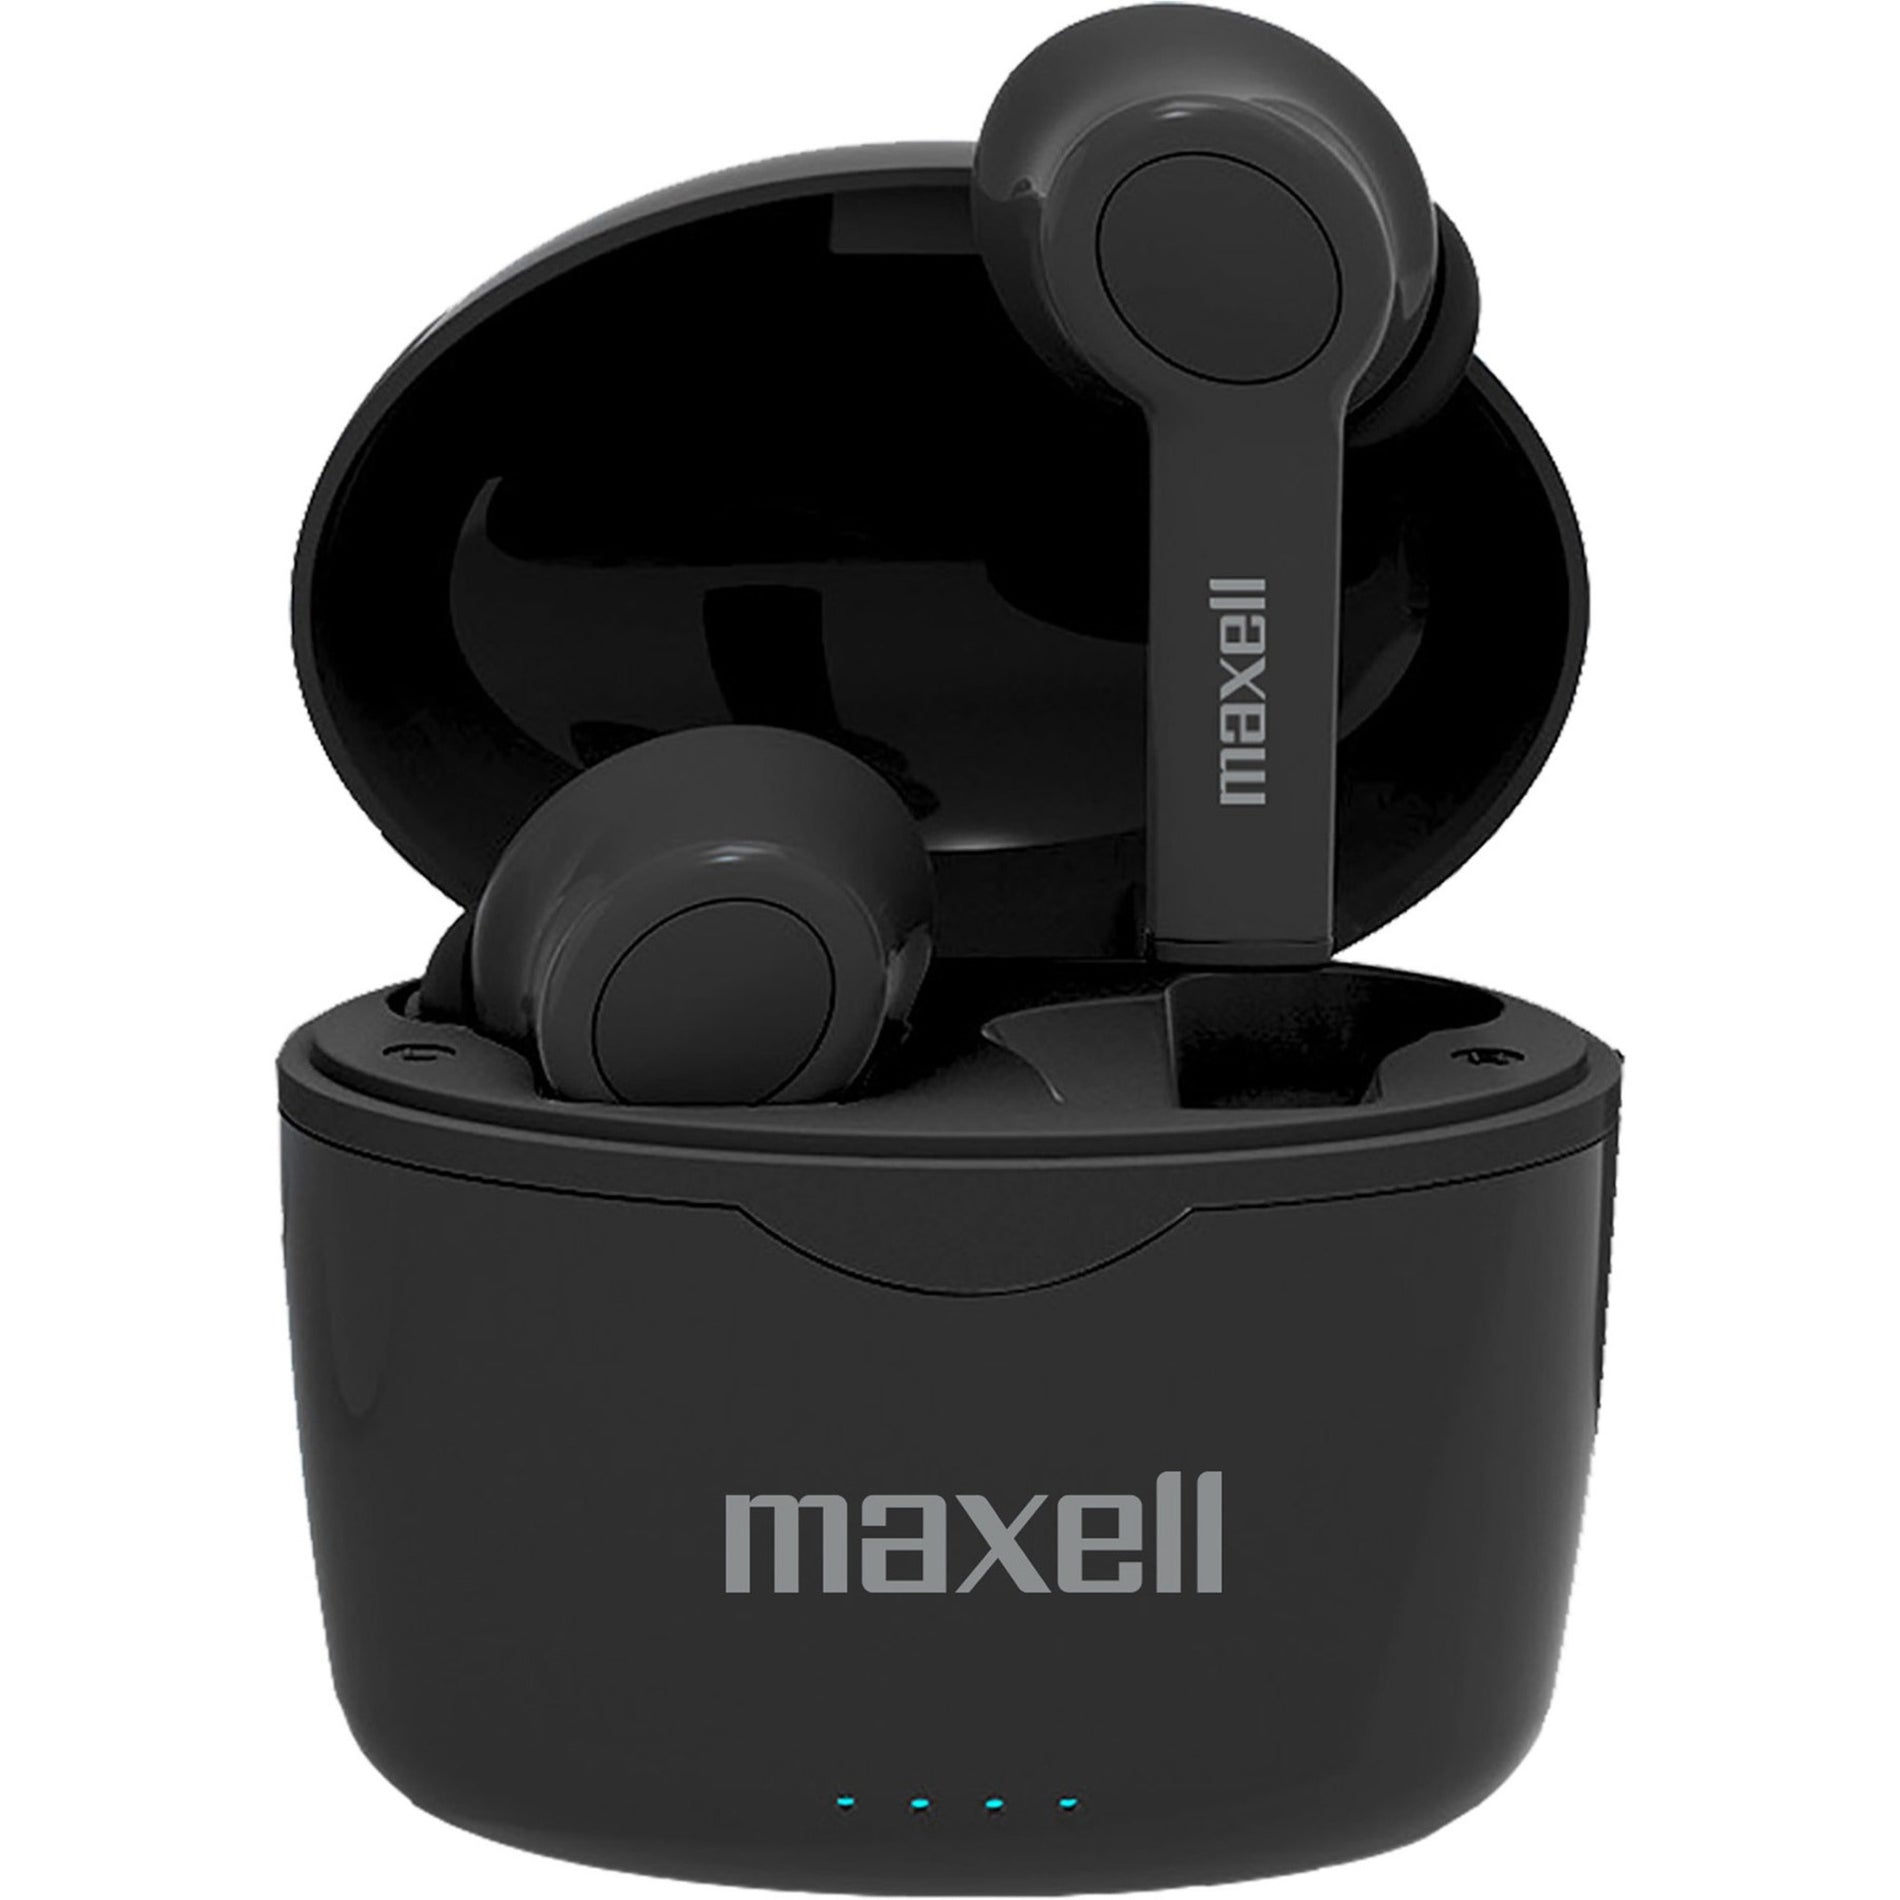 Maxell 199899 Sync Up True Wireless Bluetooth Earbuds, Secure Fit, Charging Case, Black